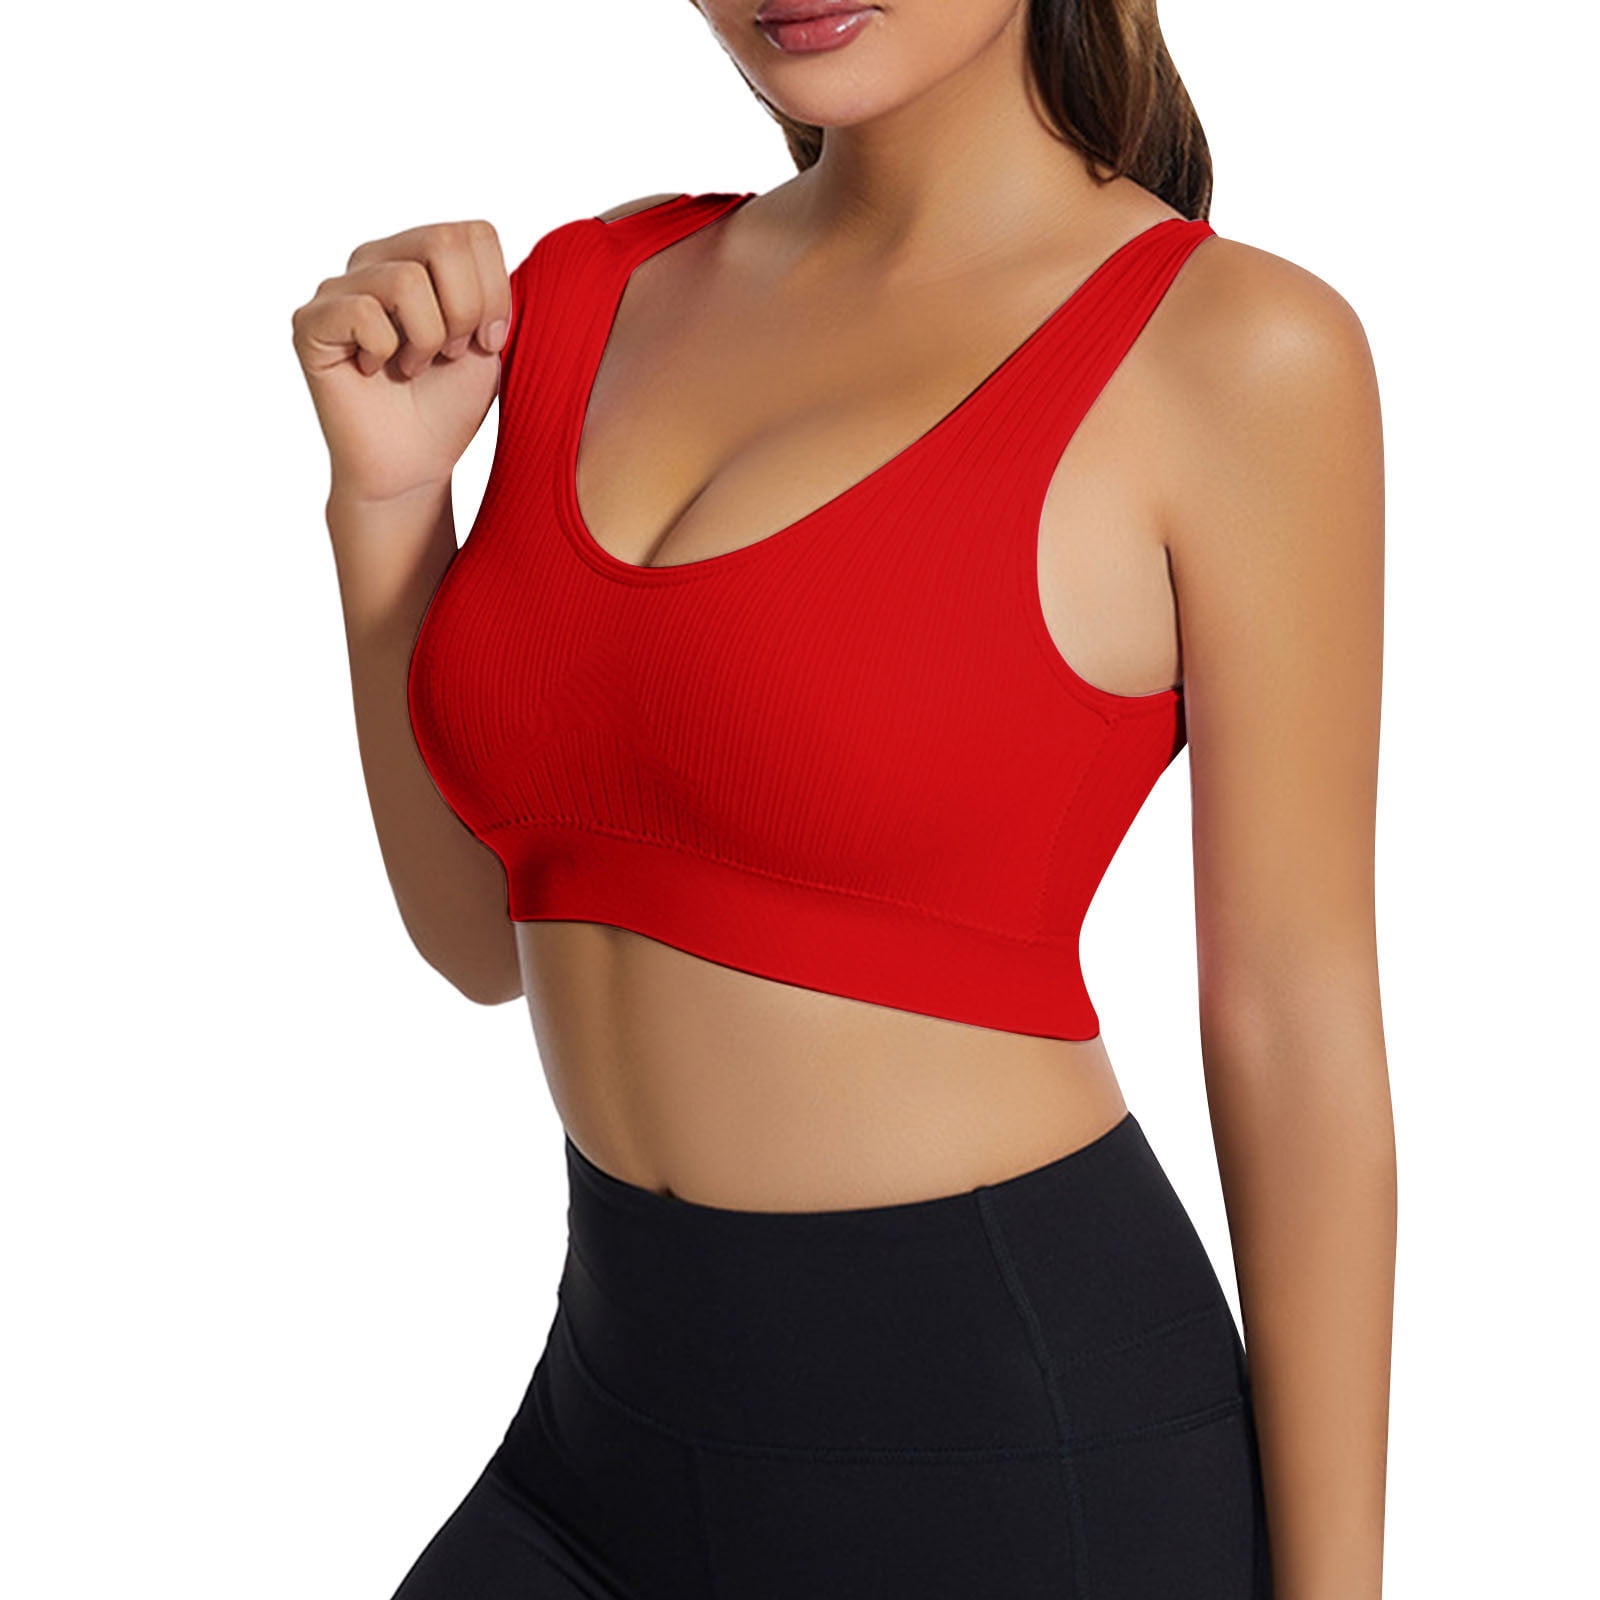  Womens Push-Up Padded Strappy Sports Bra Cross Back Wirefree  Fitness Yoga Top Red Large